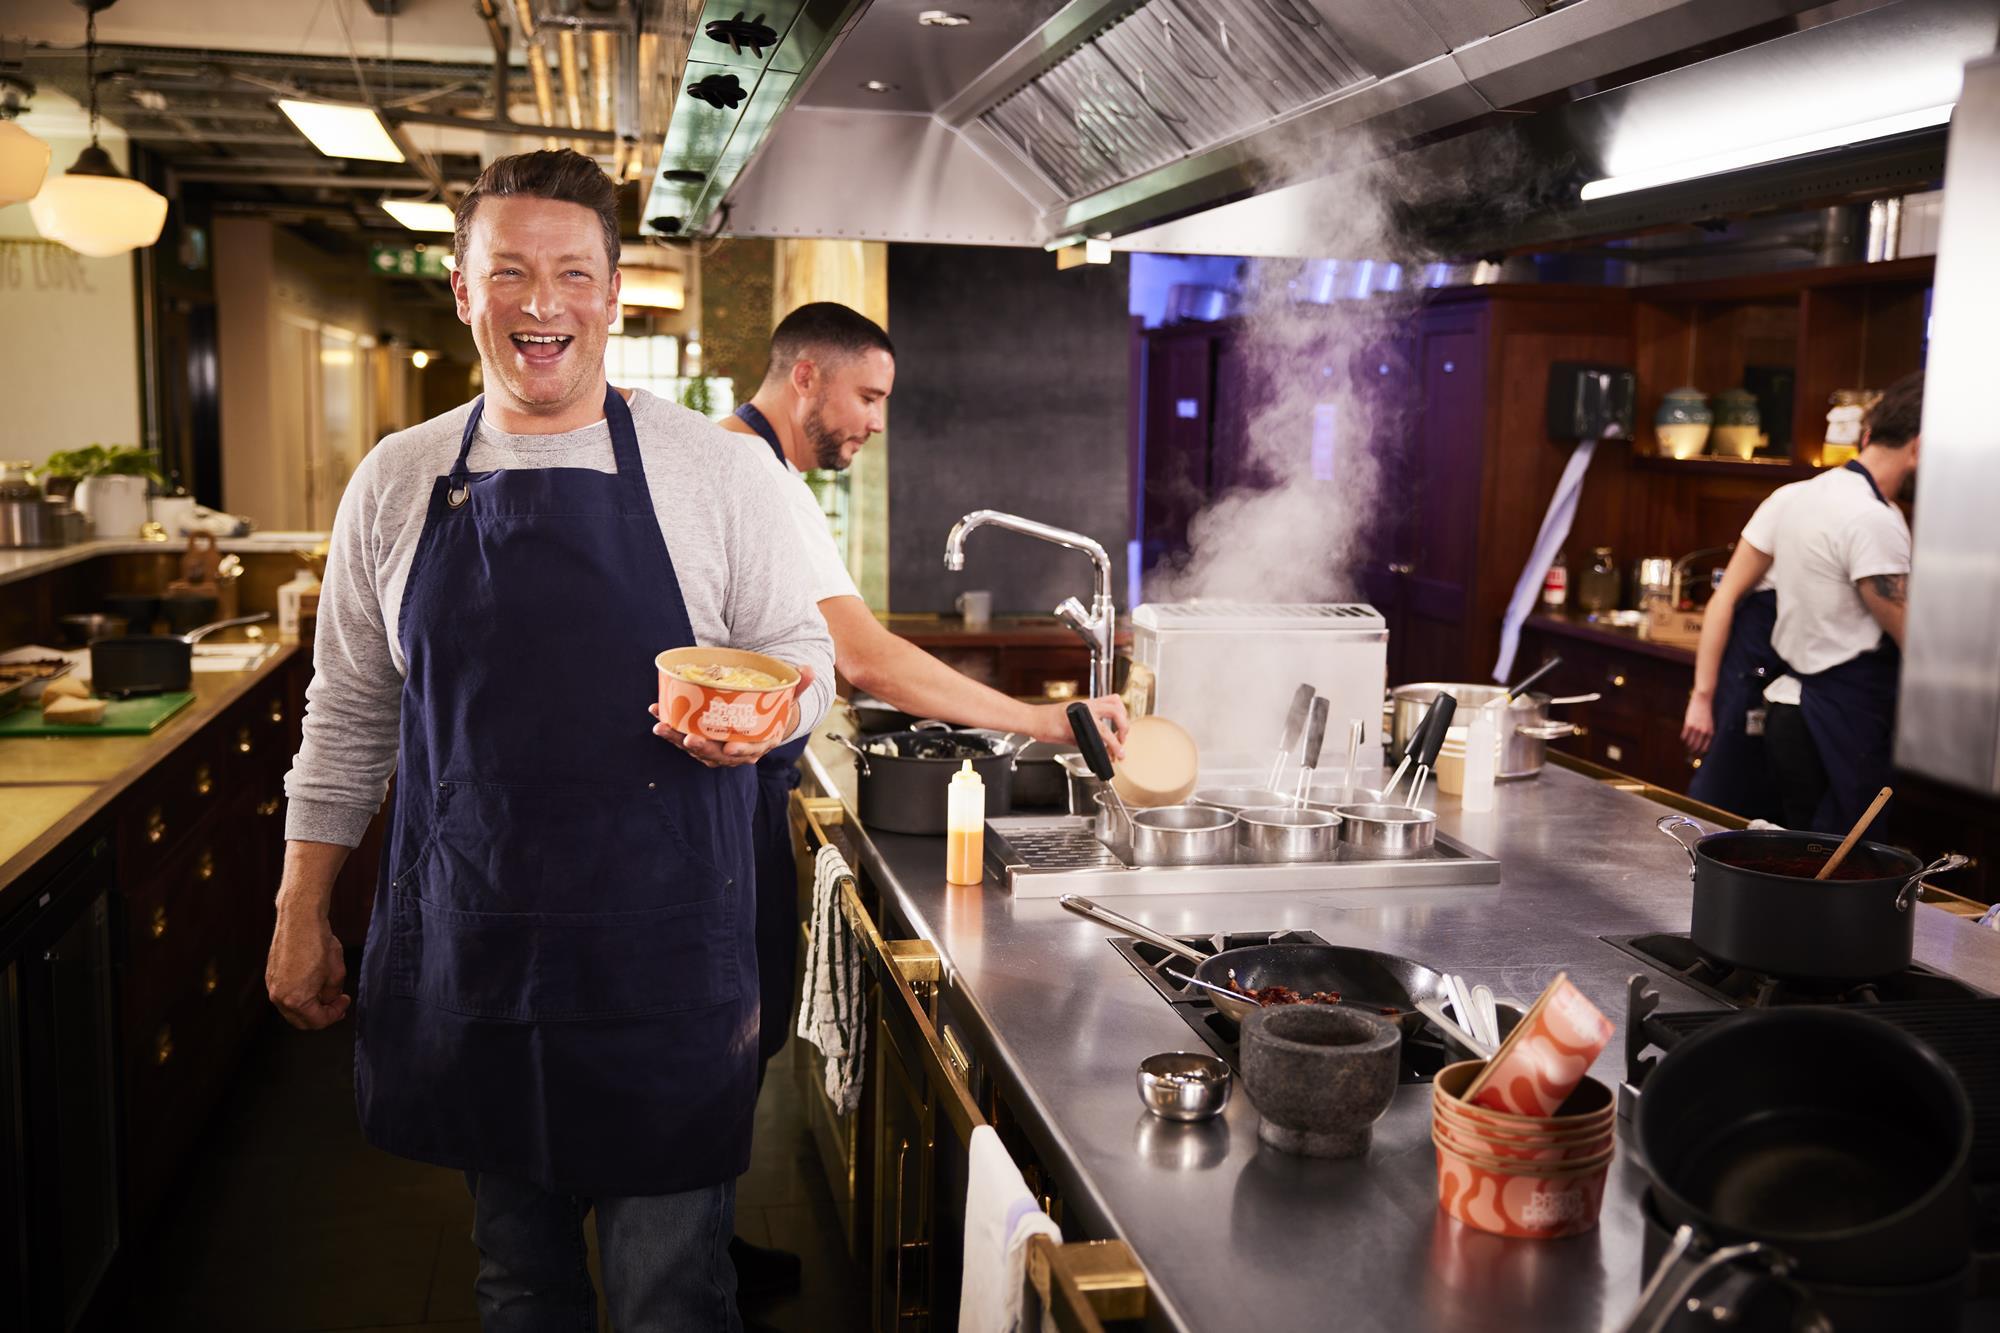 Celebrity chef Jamie Oliver is ready to open his pizzeria in Mumbai